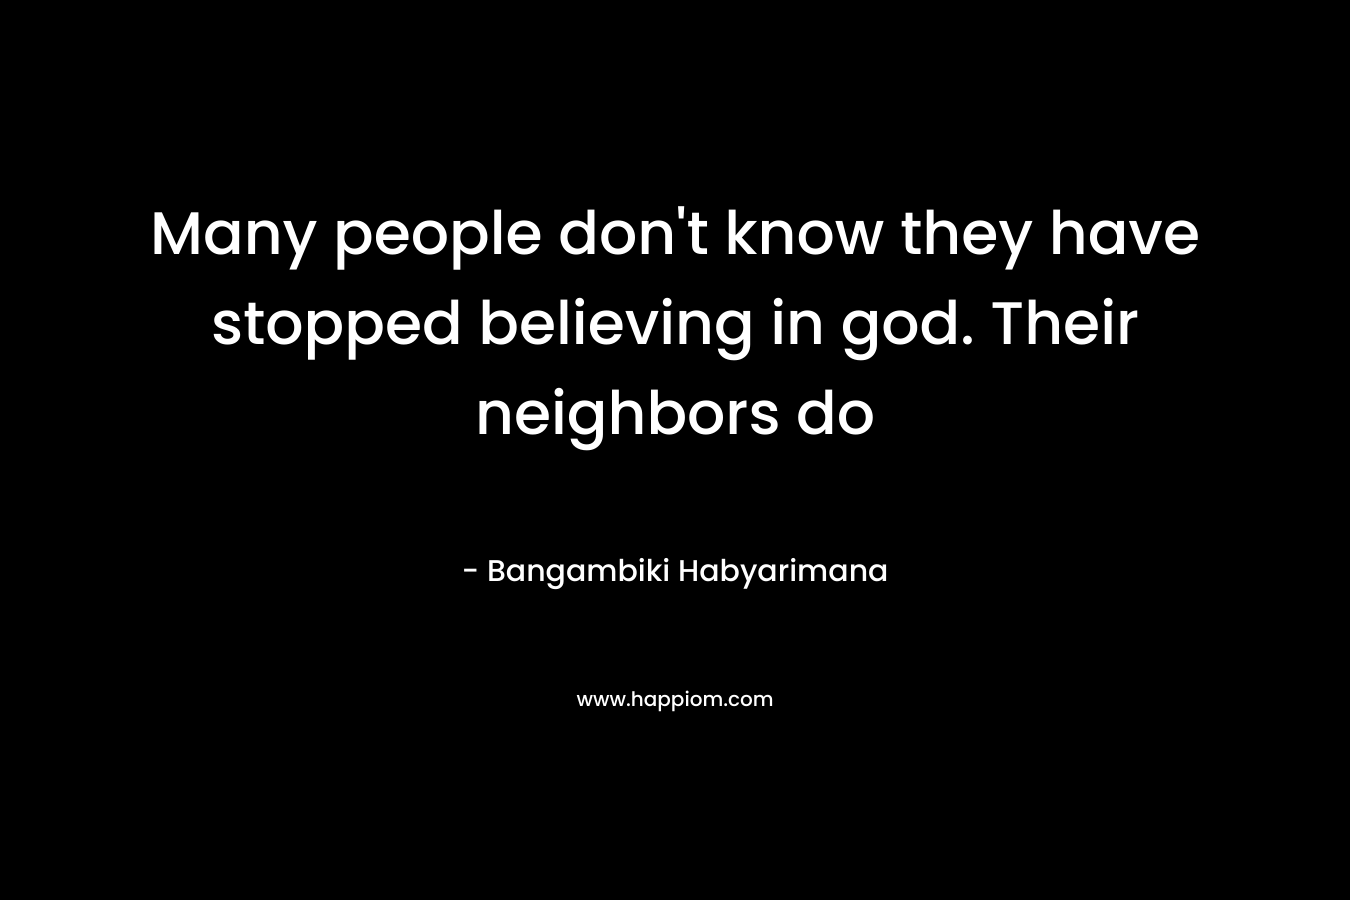 Many people don't know they have stopped believing in god. Their neighbors do